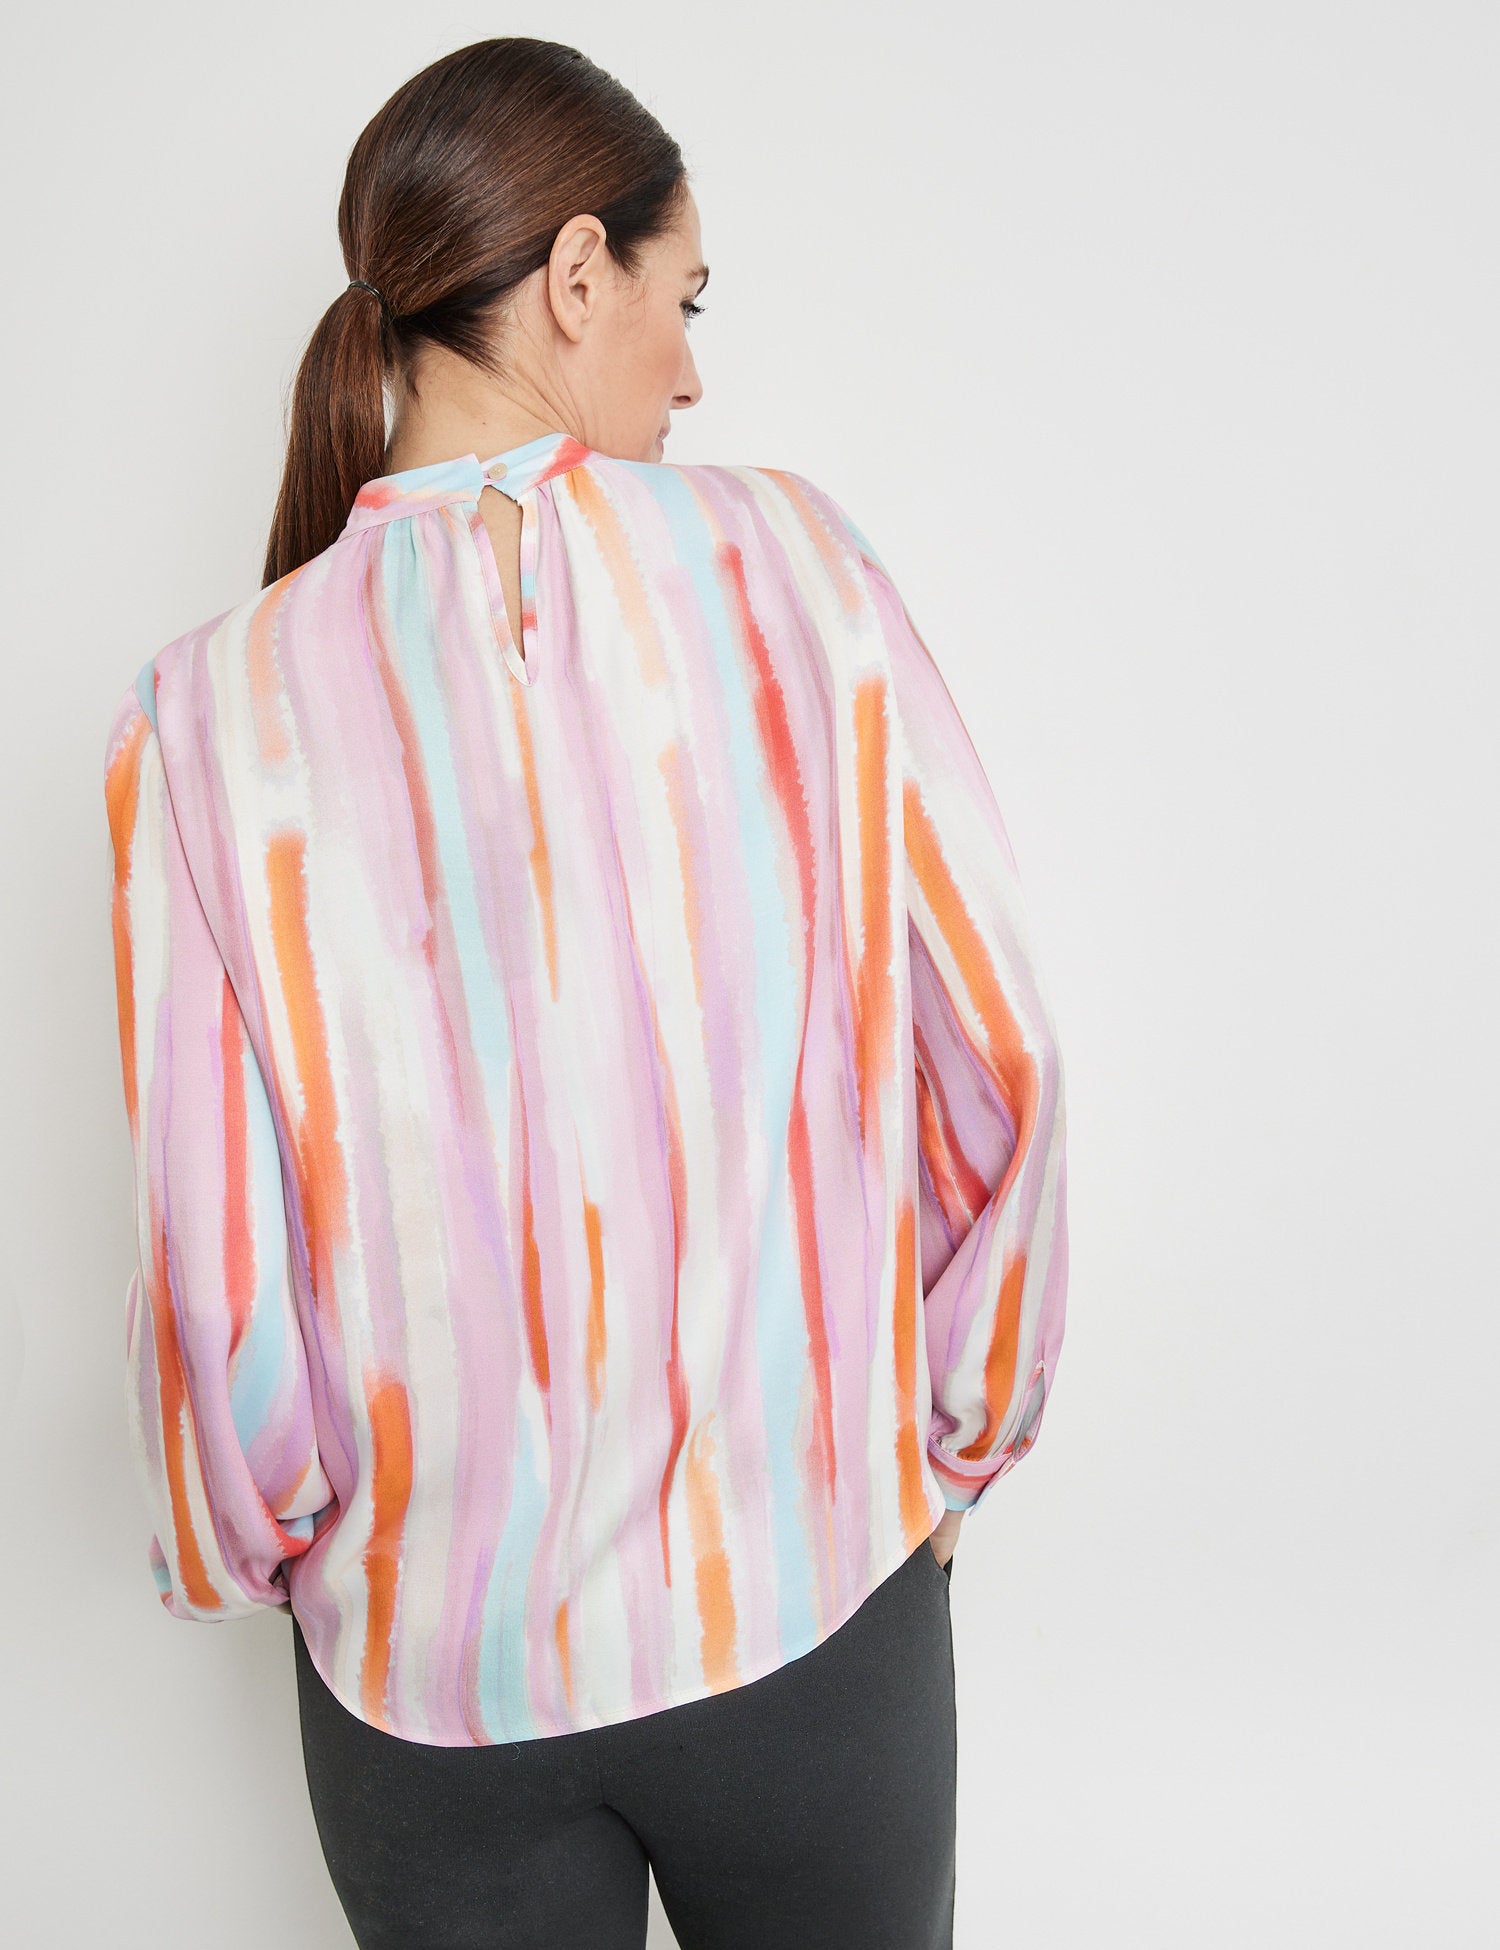 Striped Blouse With A Stand-Up Collar_360068-31461_3069_06